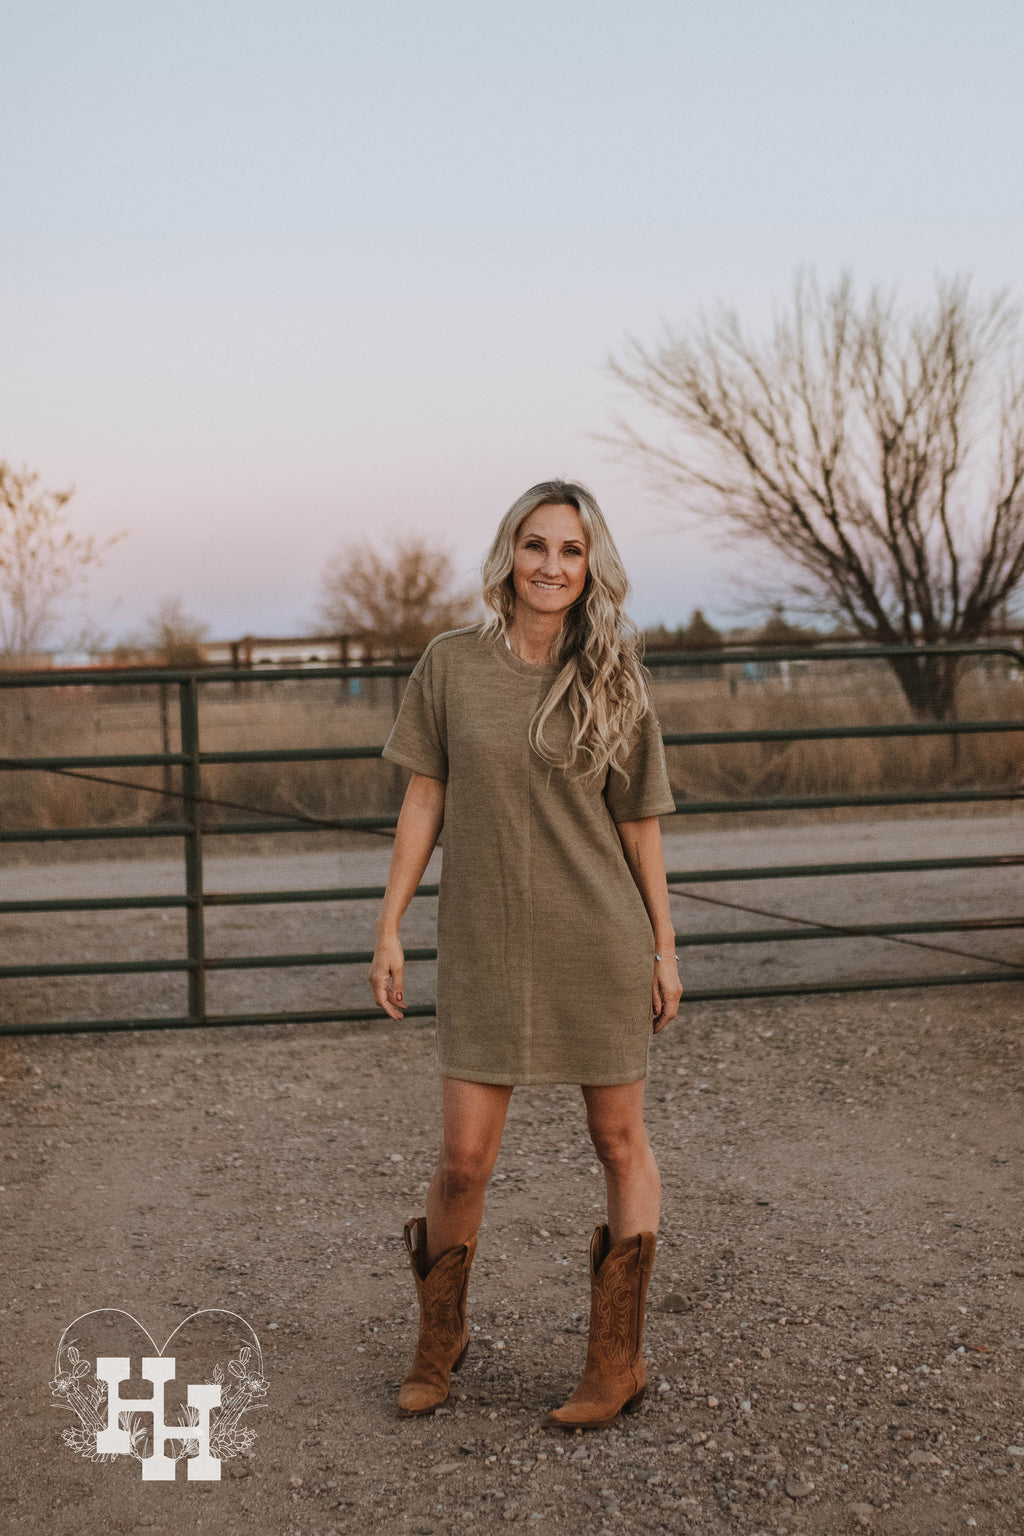 Girl wearing a knit light olive green tshirt dress with cowboy boots.